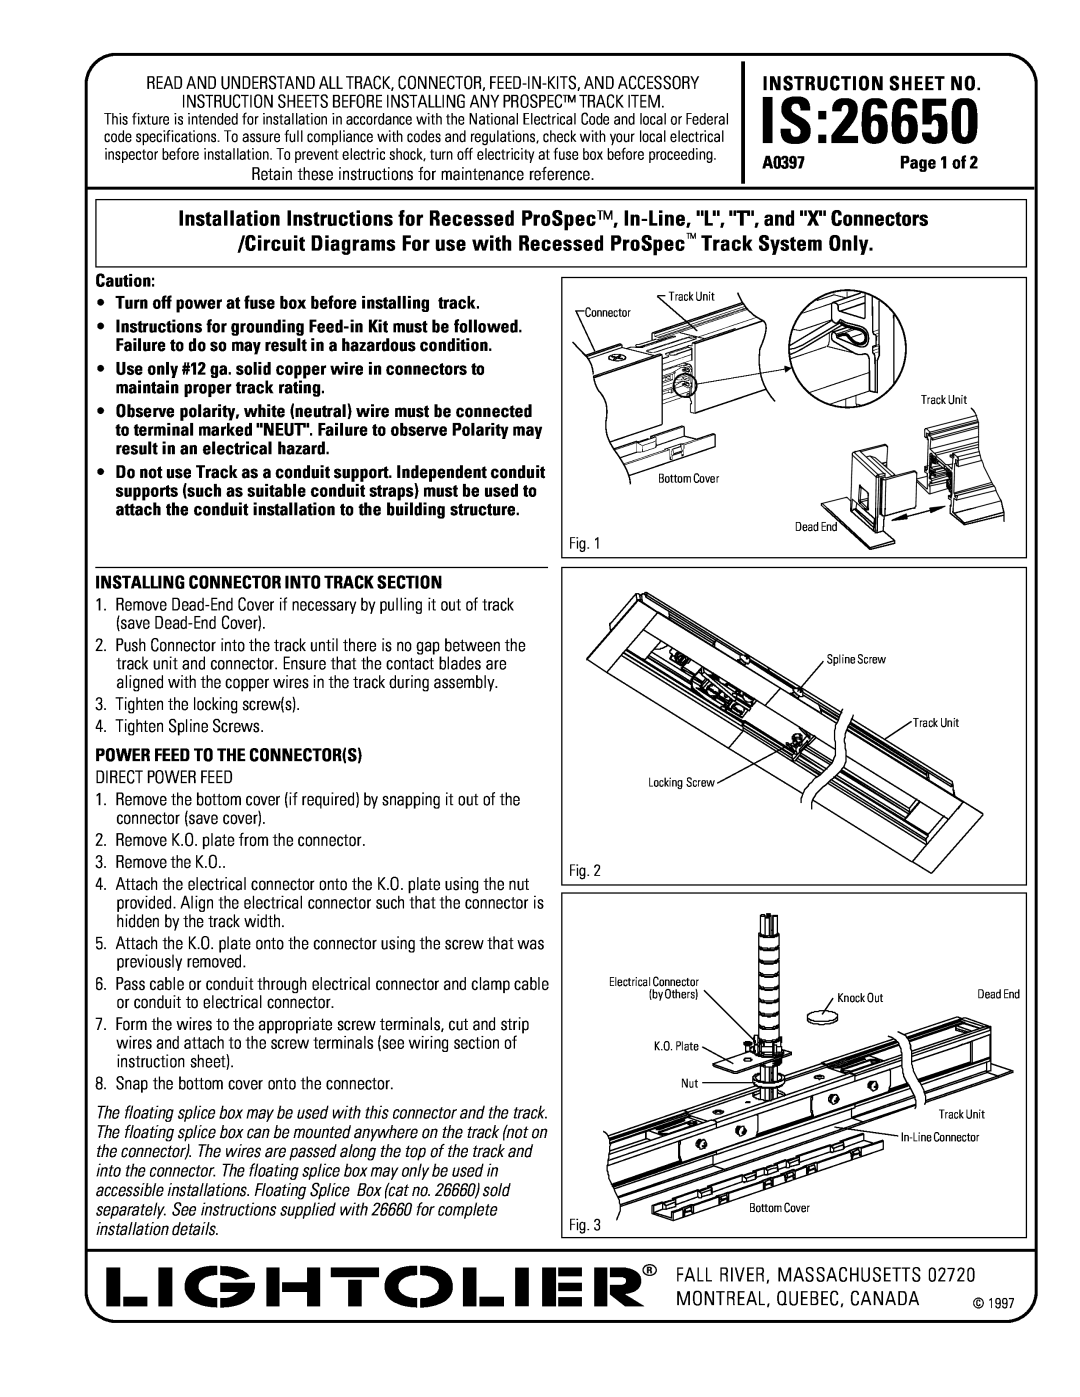 Lightolier instruction sheet IS26650, Instruction Sheet No, A0397, Turn off power at fuse box before installing track 